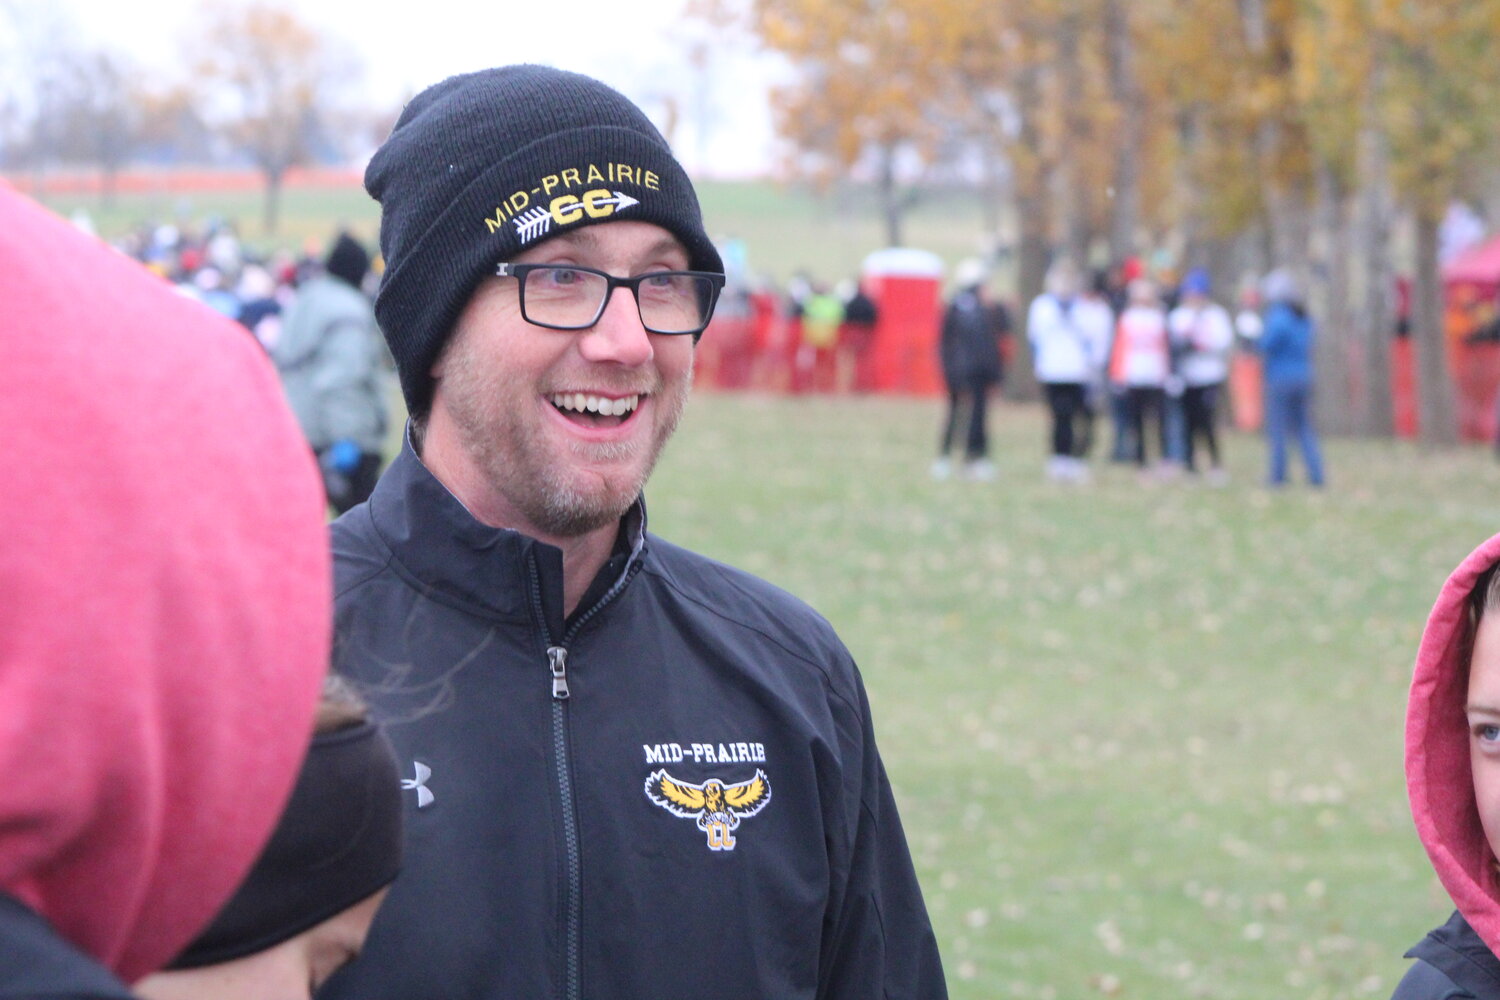 Jeremy Meyers, a math teacher at Mid-Prairie Middle School, inherited one of the state's top cross country programs this year as head coach.